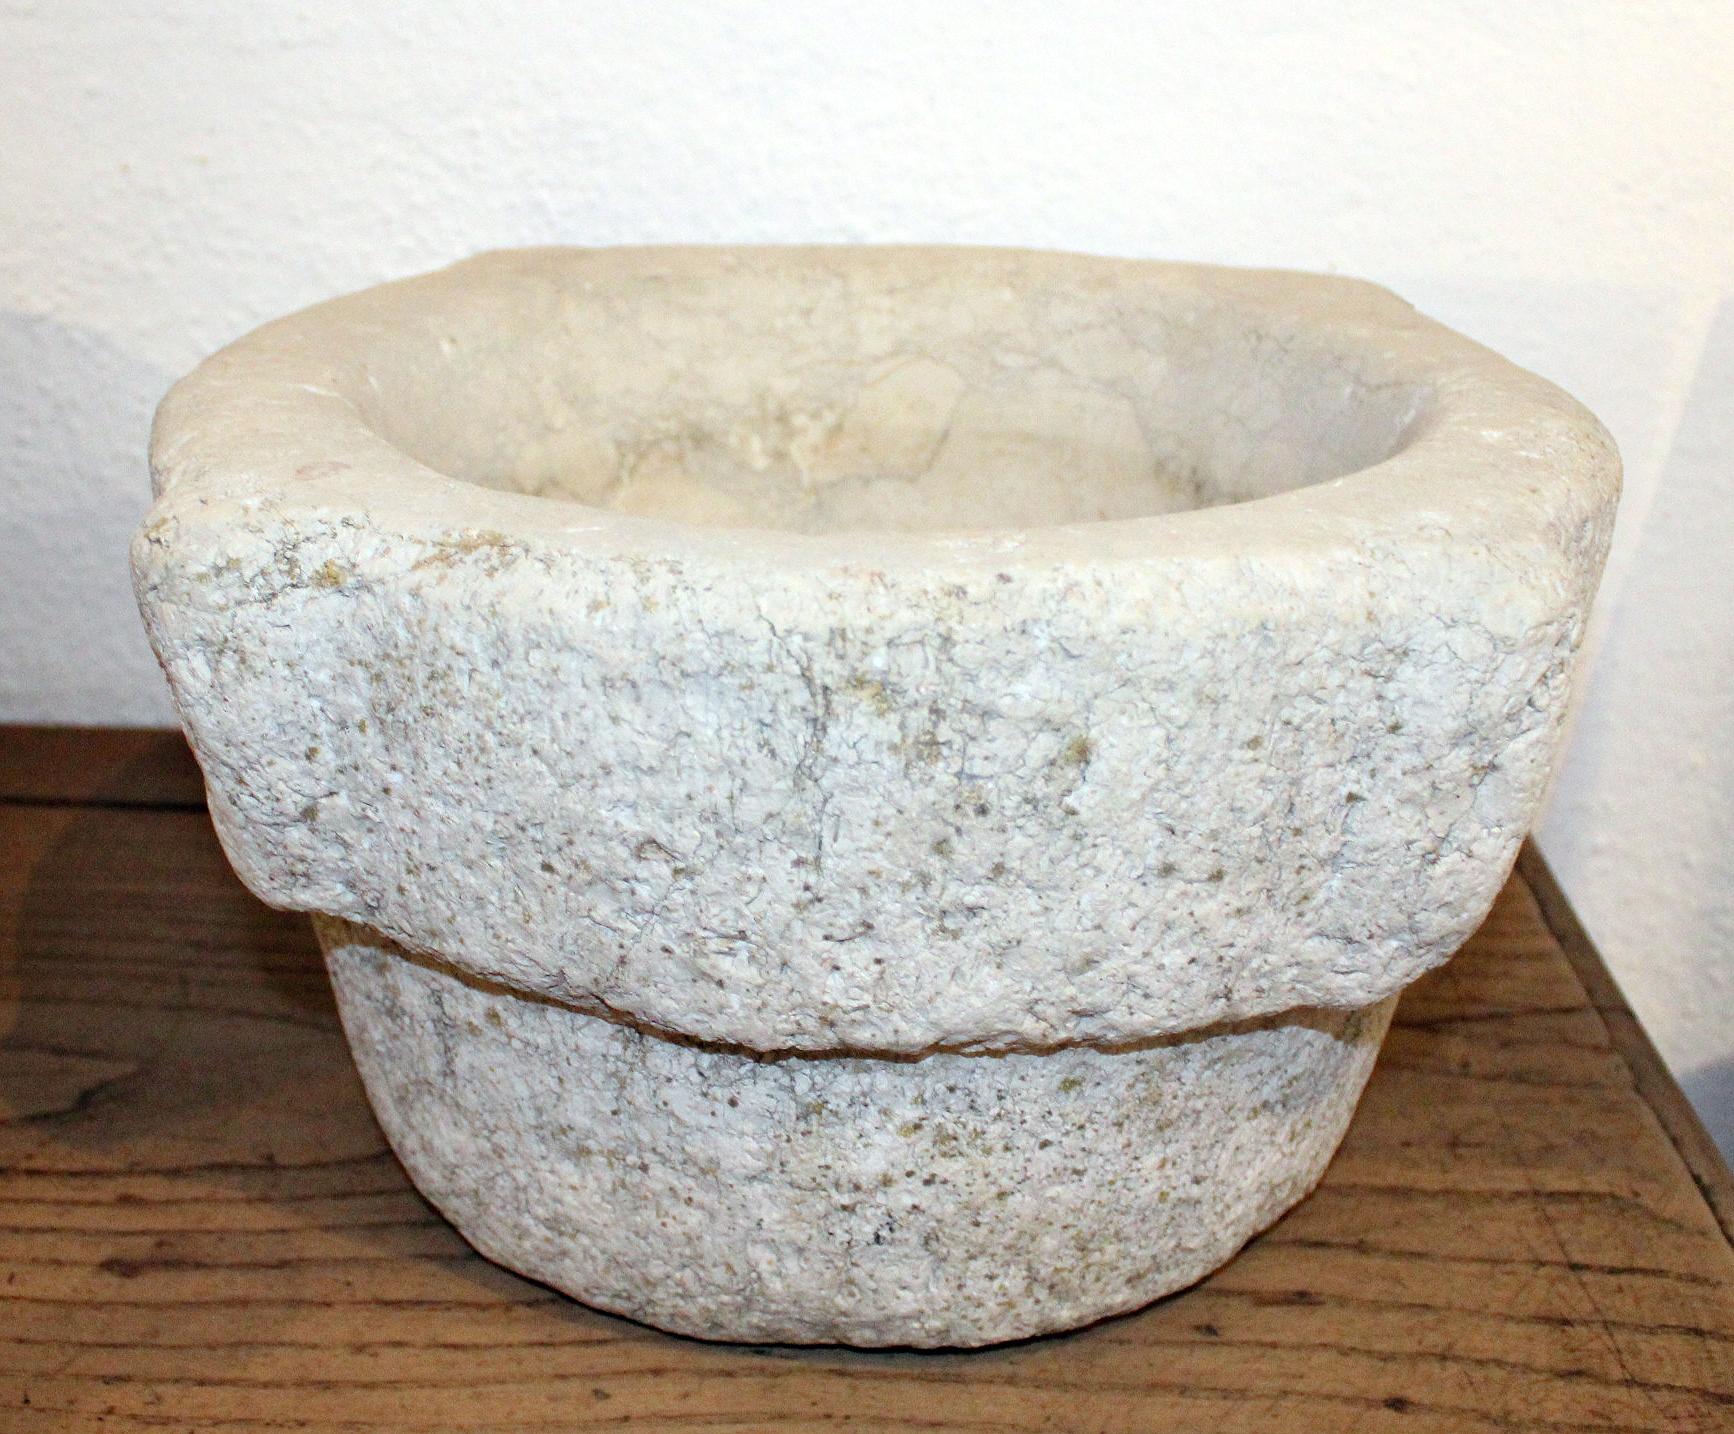 18th century Spanish hand carved stone kitchen mortar, used in kitchens and pharmacies to prepare herbs for cooking or healing.
 